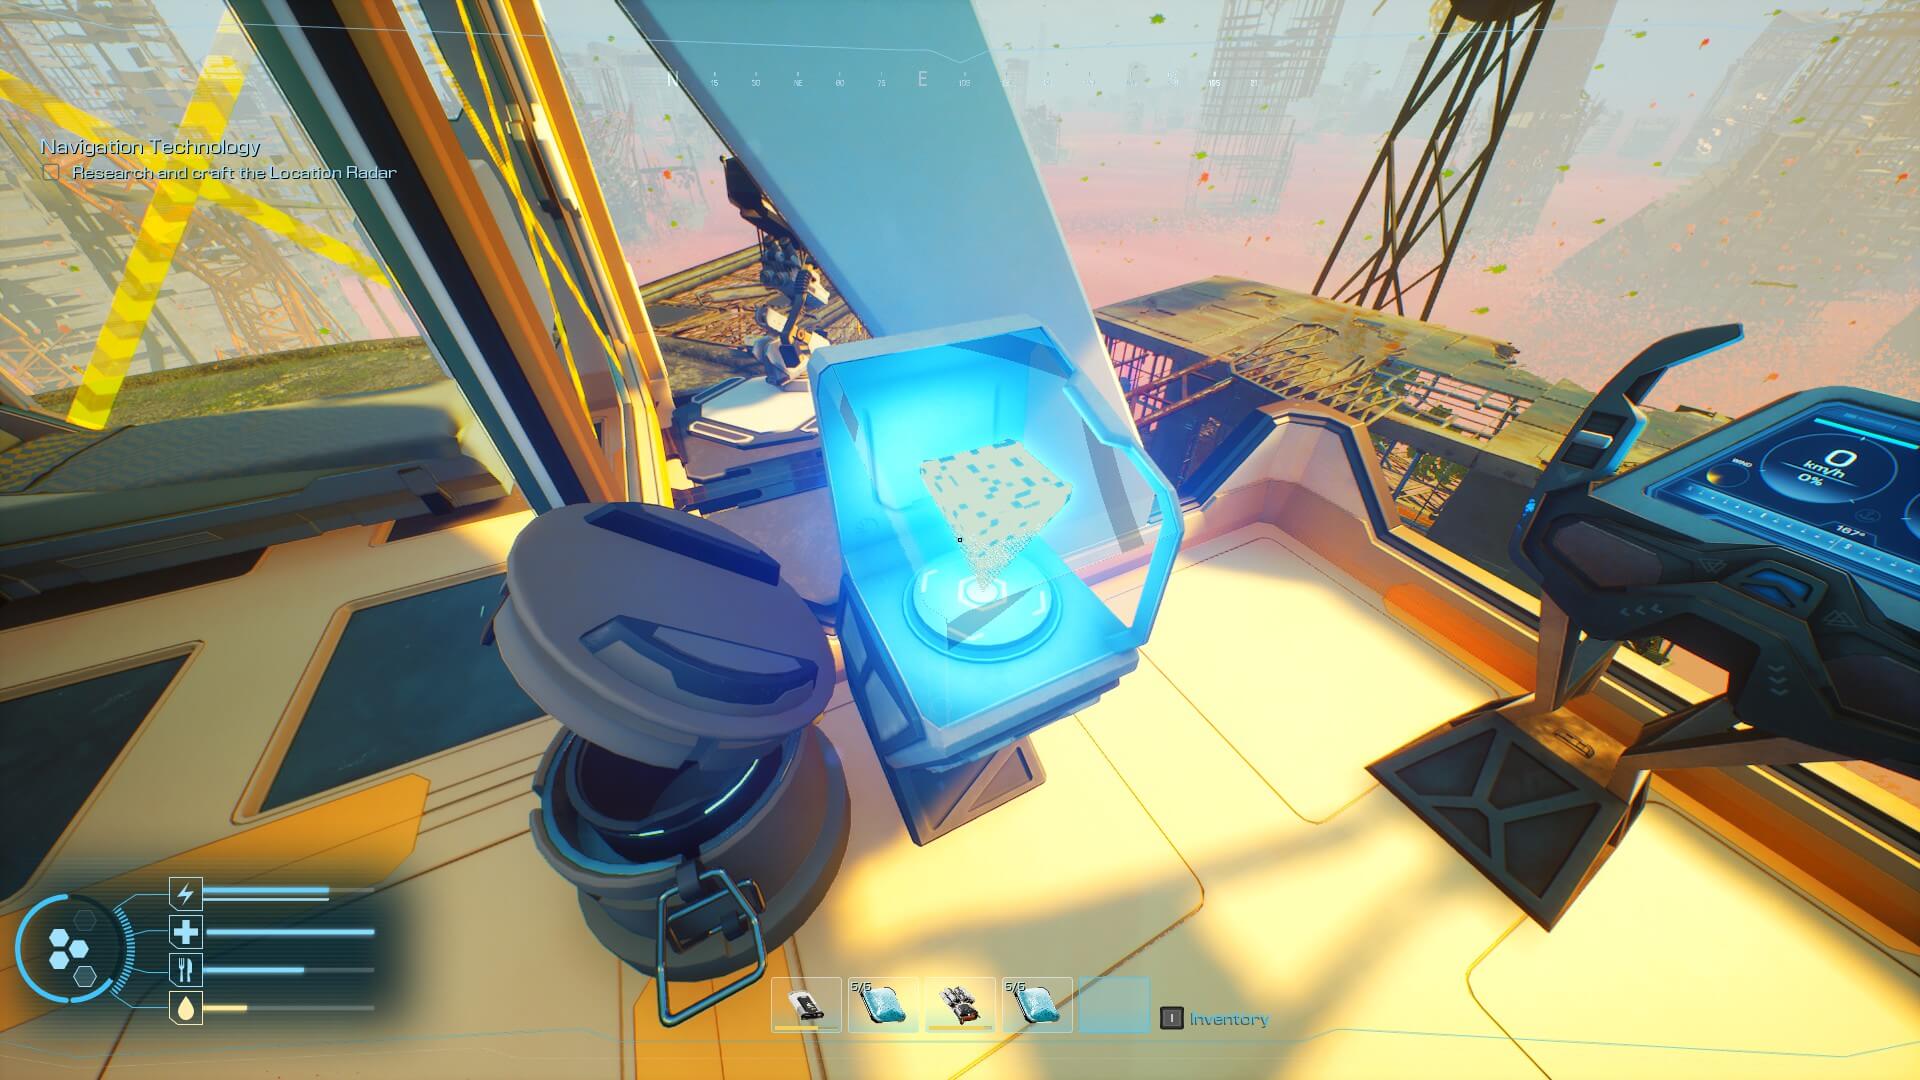 The fabricator, a blue-topped device for crafting, as well as a pressure-cooking pot can be seen on the floor of the ship.